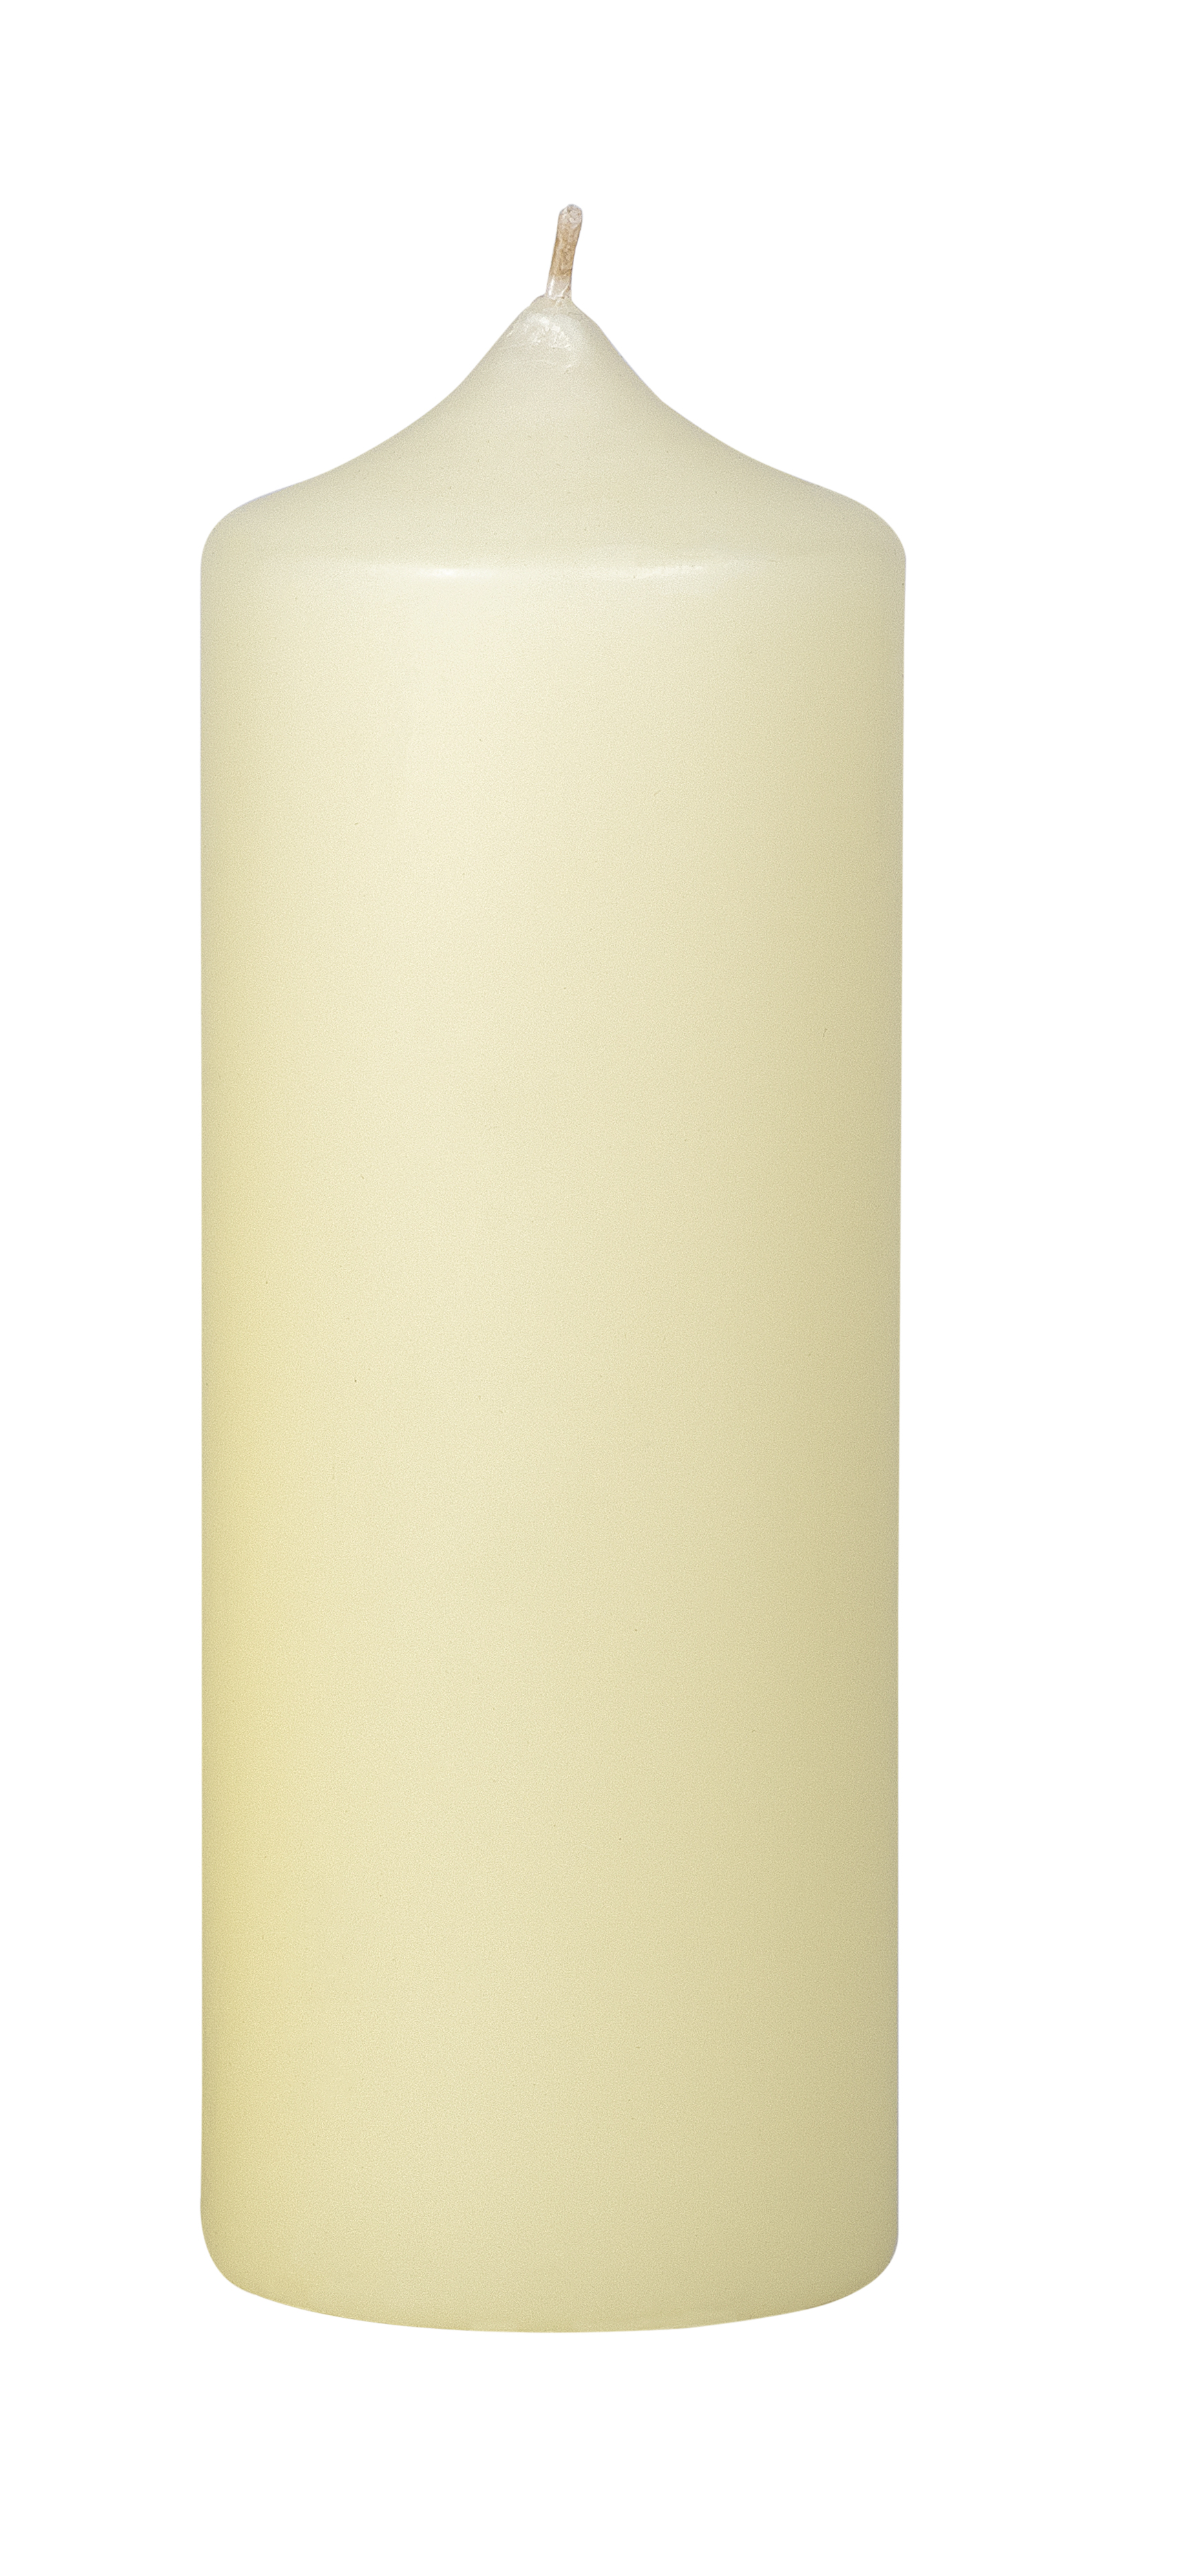 Church candle 20 cm 10% beeswax